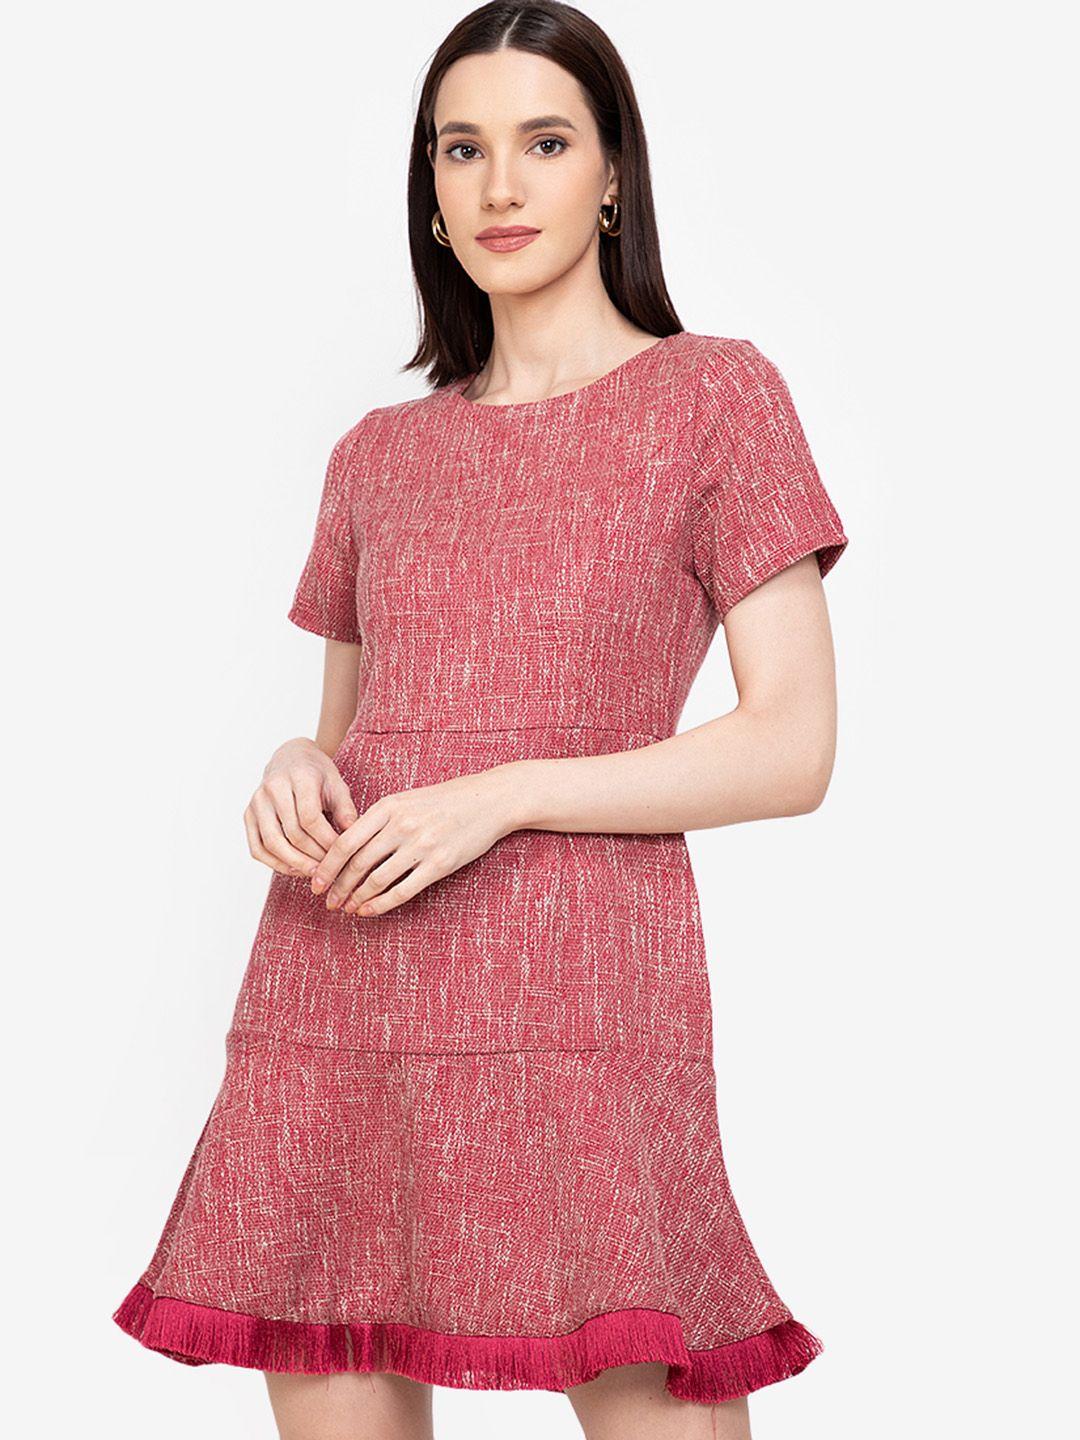 zalora work off white & red printed fit & flare dress